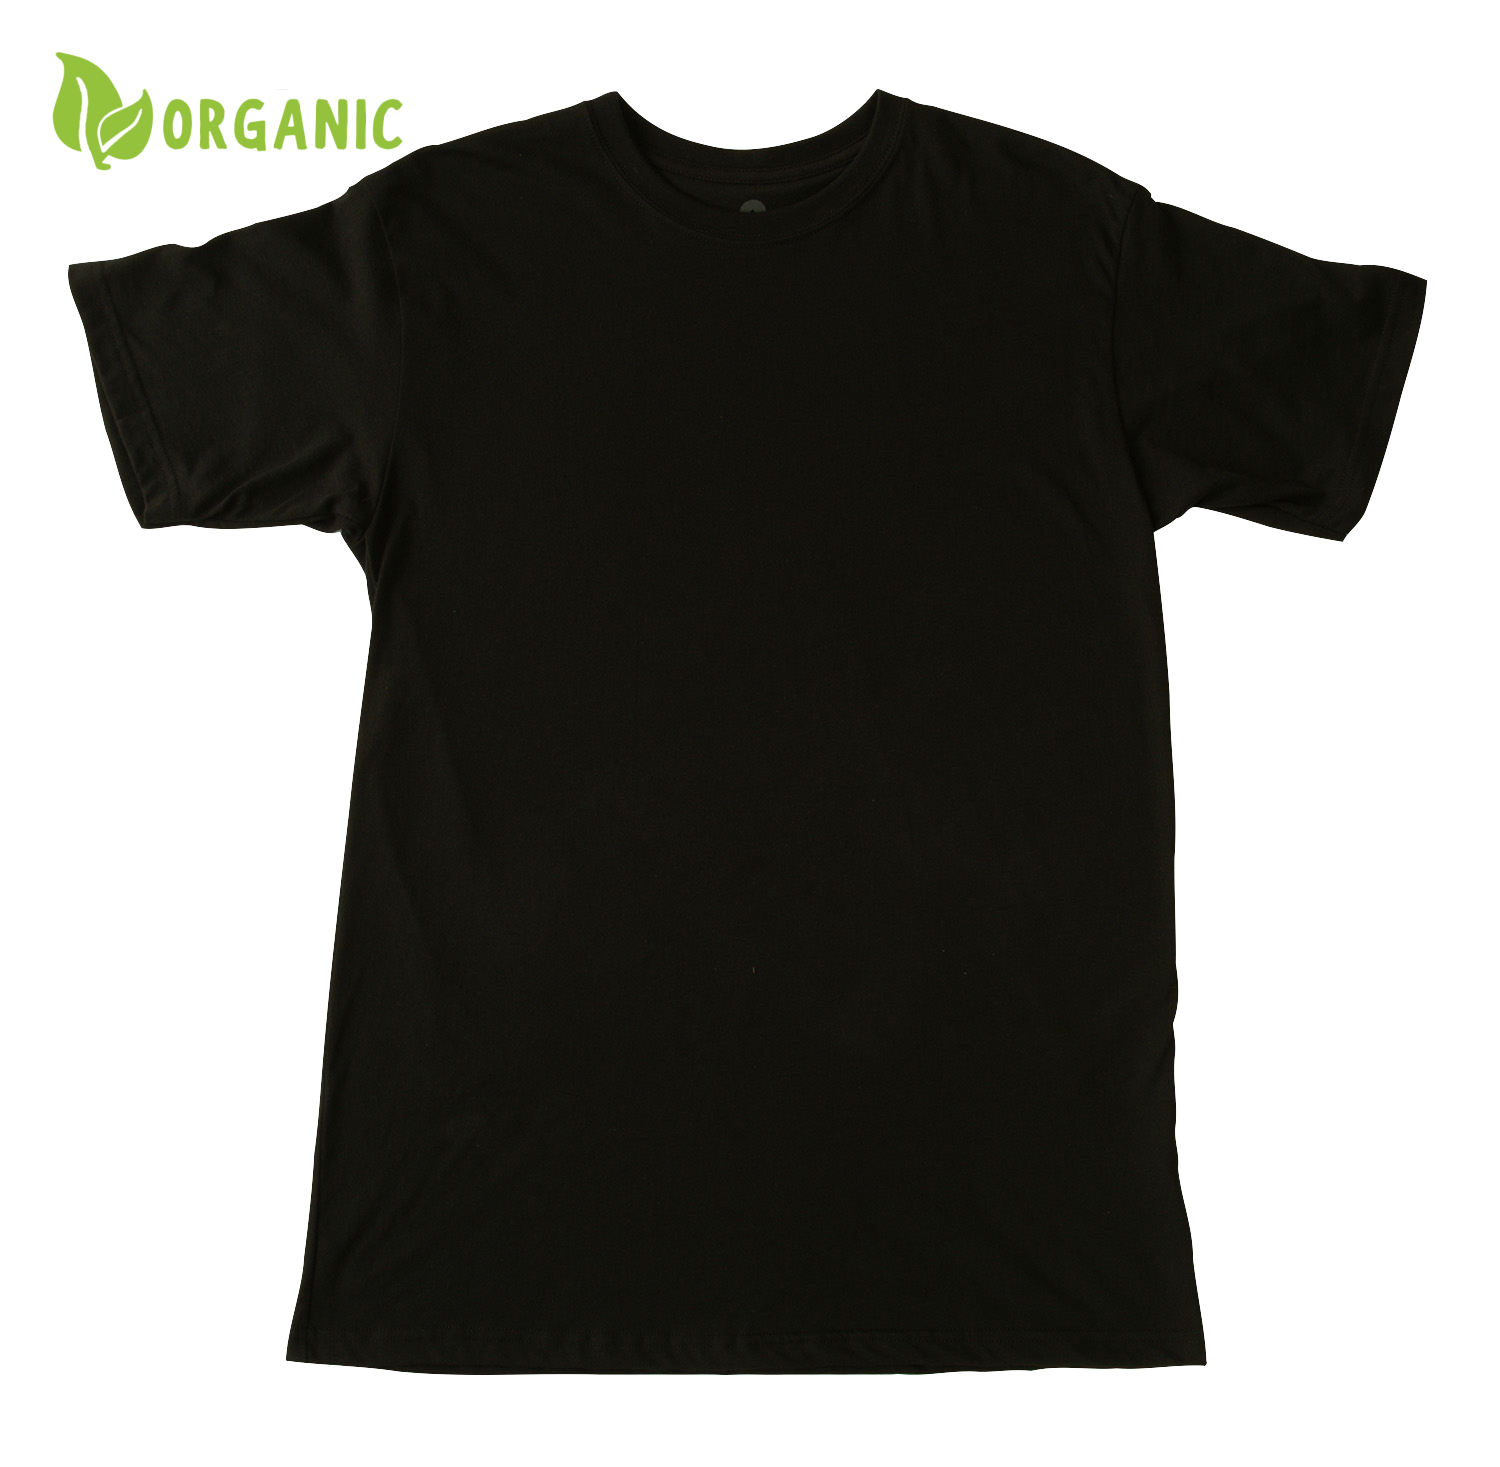 Nature Backs Short Sleeve 100% Organic Cotton T-Shirt | Minimalist Black Short Sleeve made with Eco-Friendly Fibers Sustainably made in the USA 